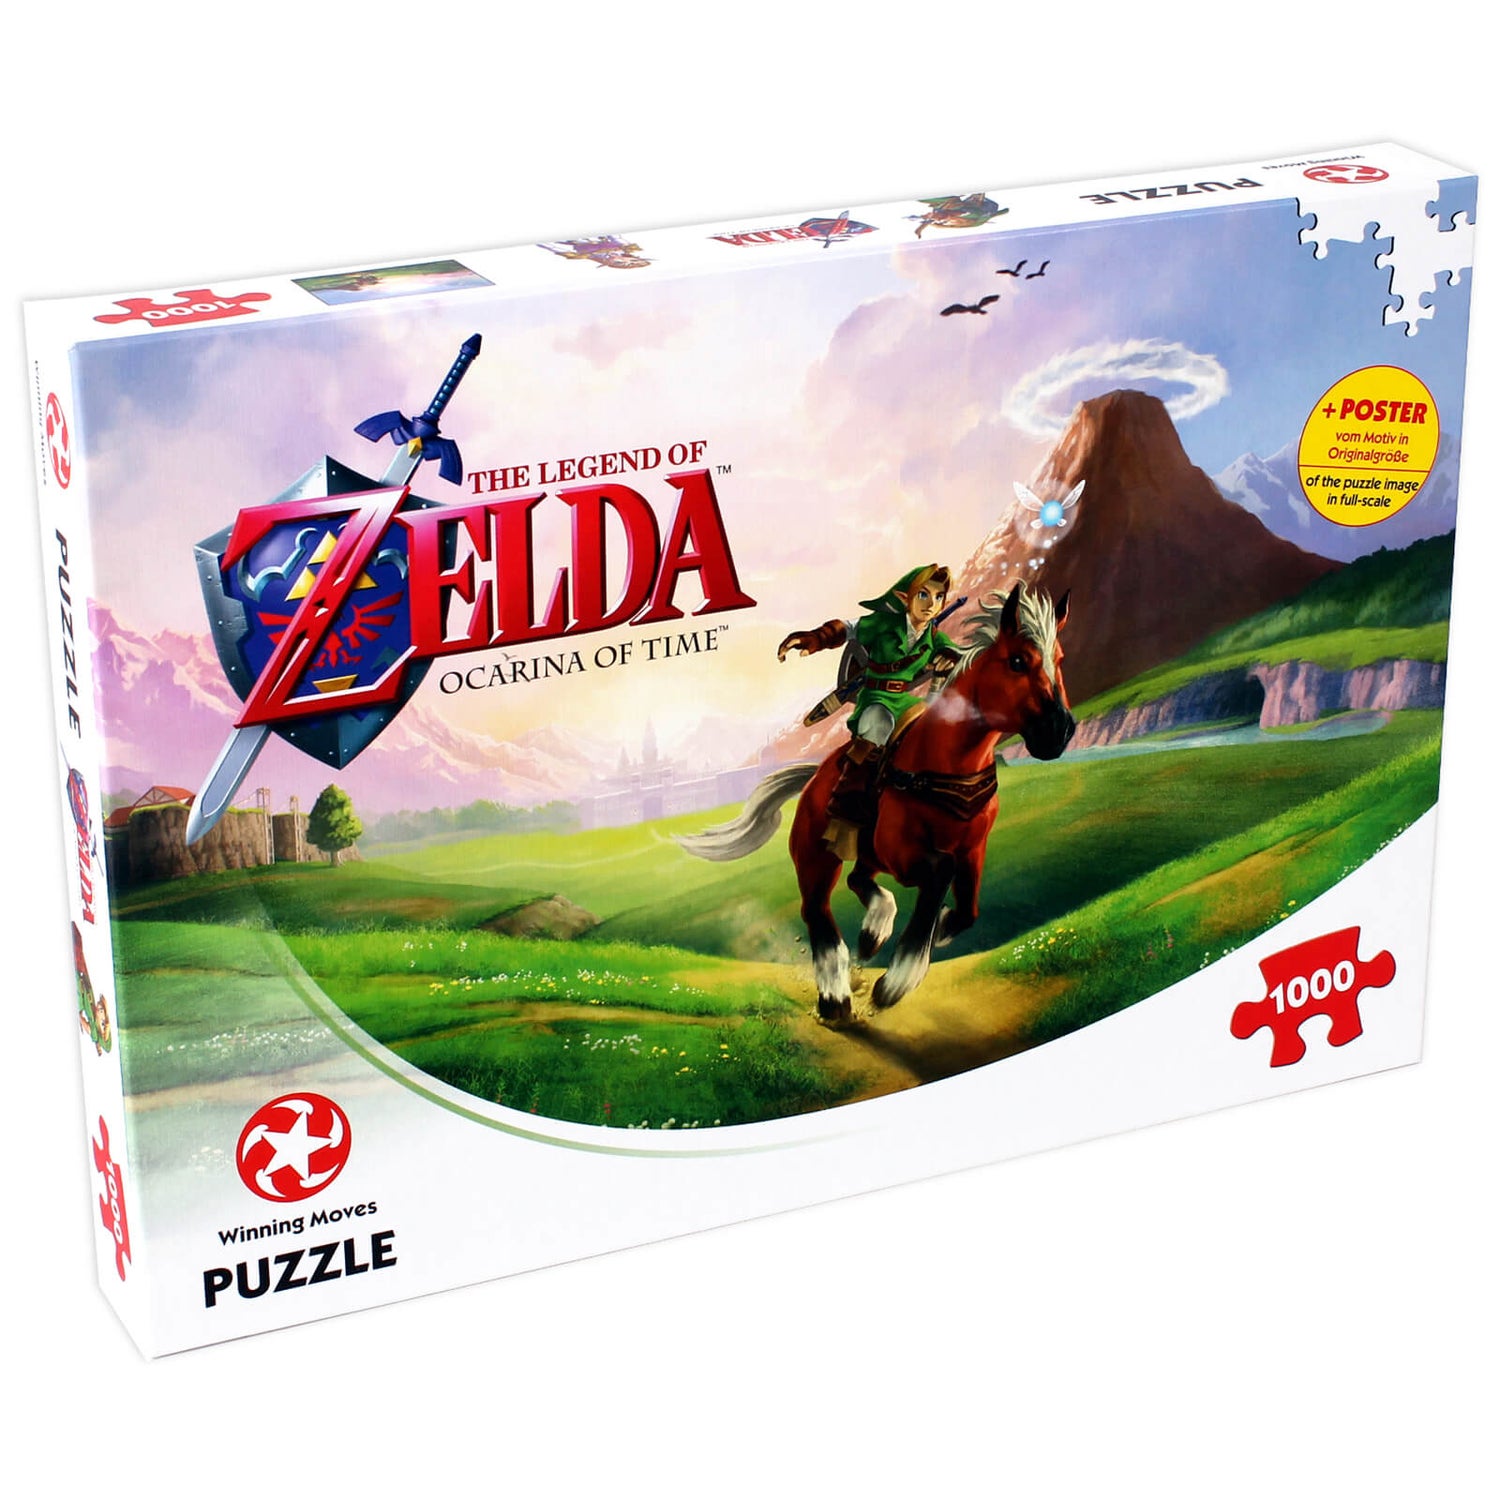 1000 Piece Jigsaw Puzzle - The Legend of Zelda Ocarina of Time Edition